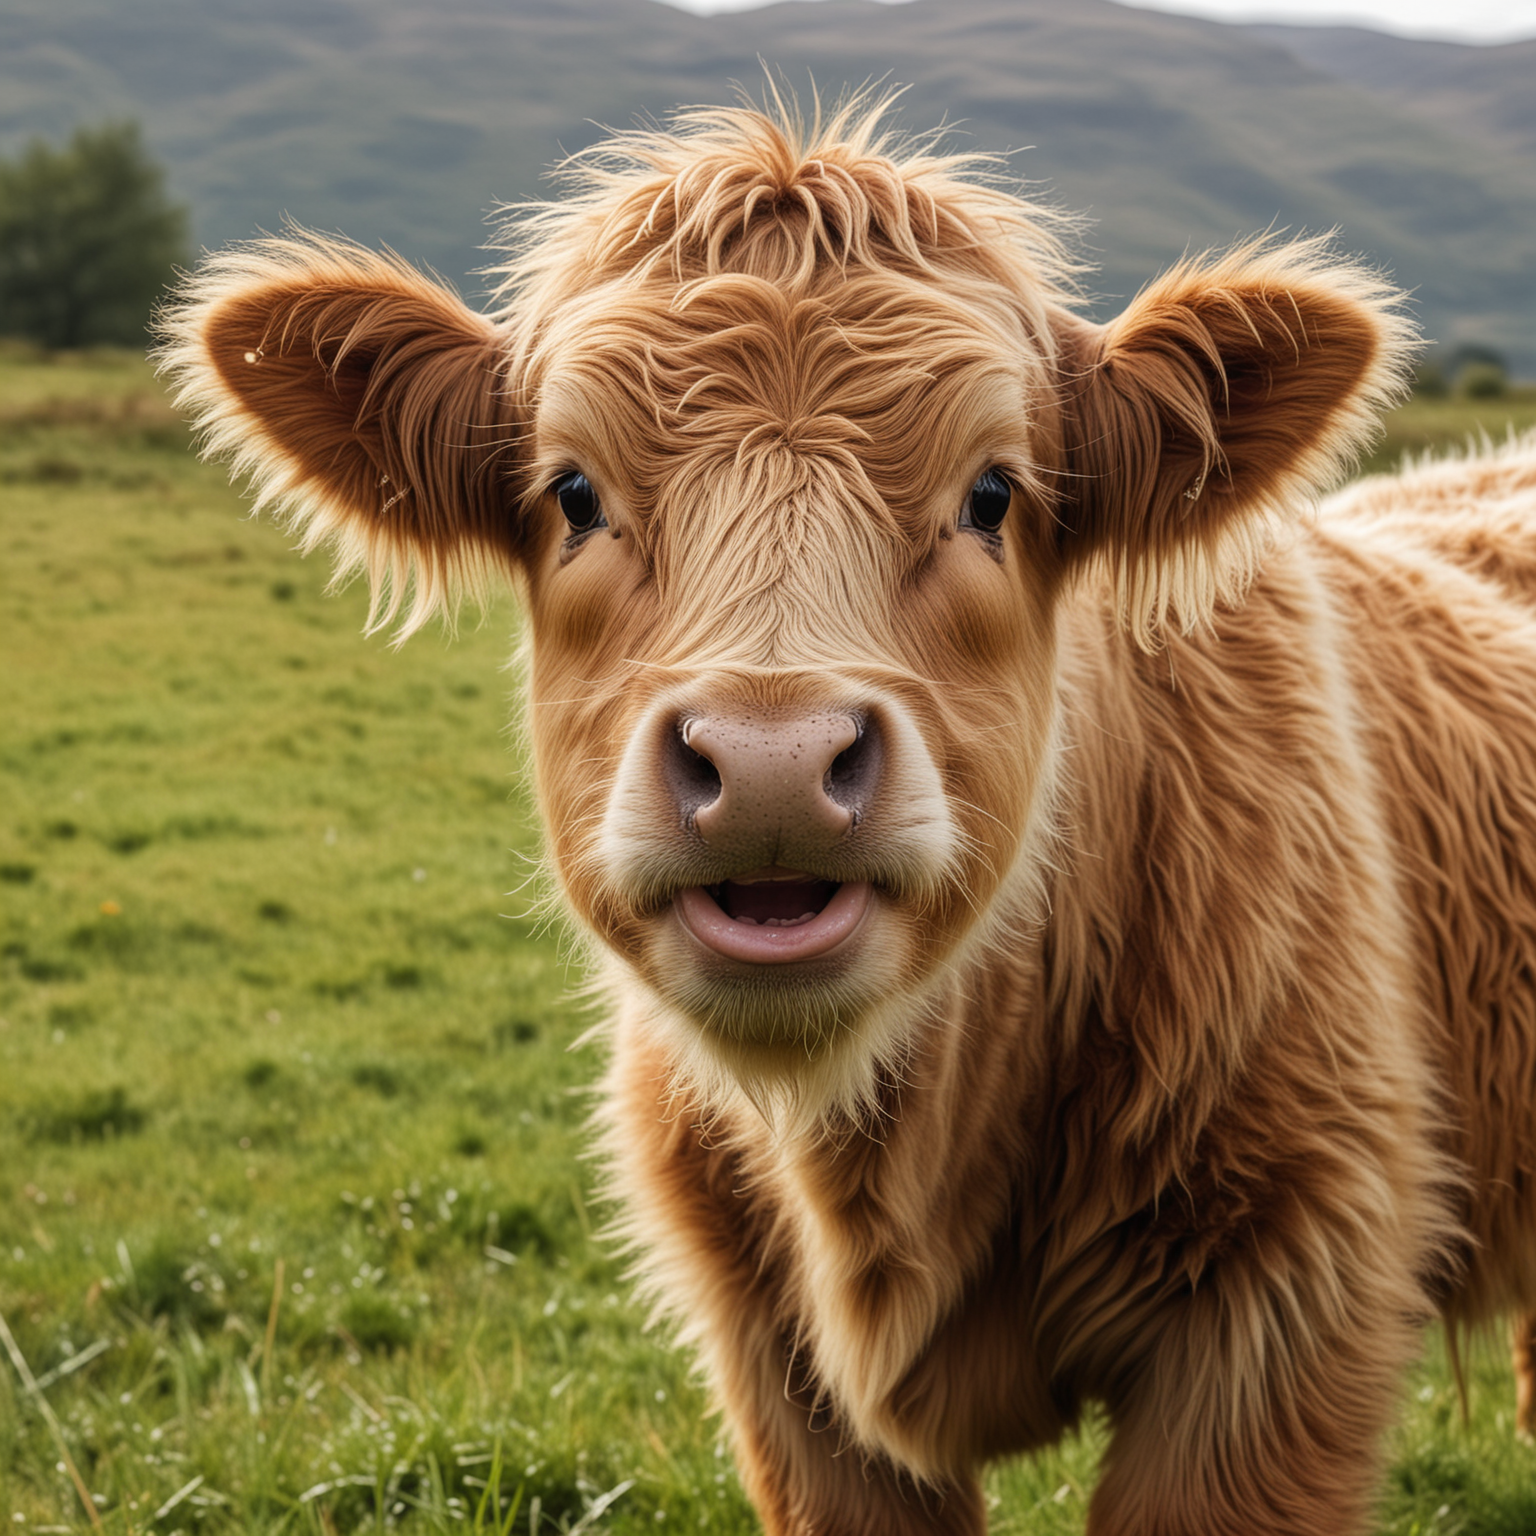 a high resolution closeup a cute image of a highland baby cow with thick fur and small horns laughing at you at a grass field. the calf is brown and his hair is long